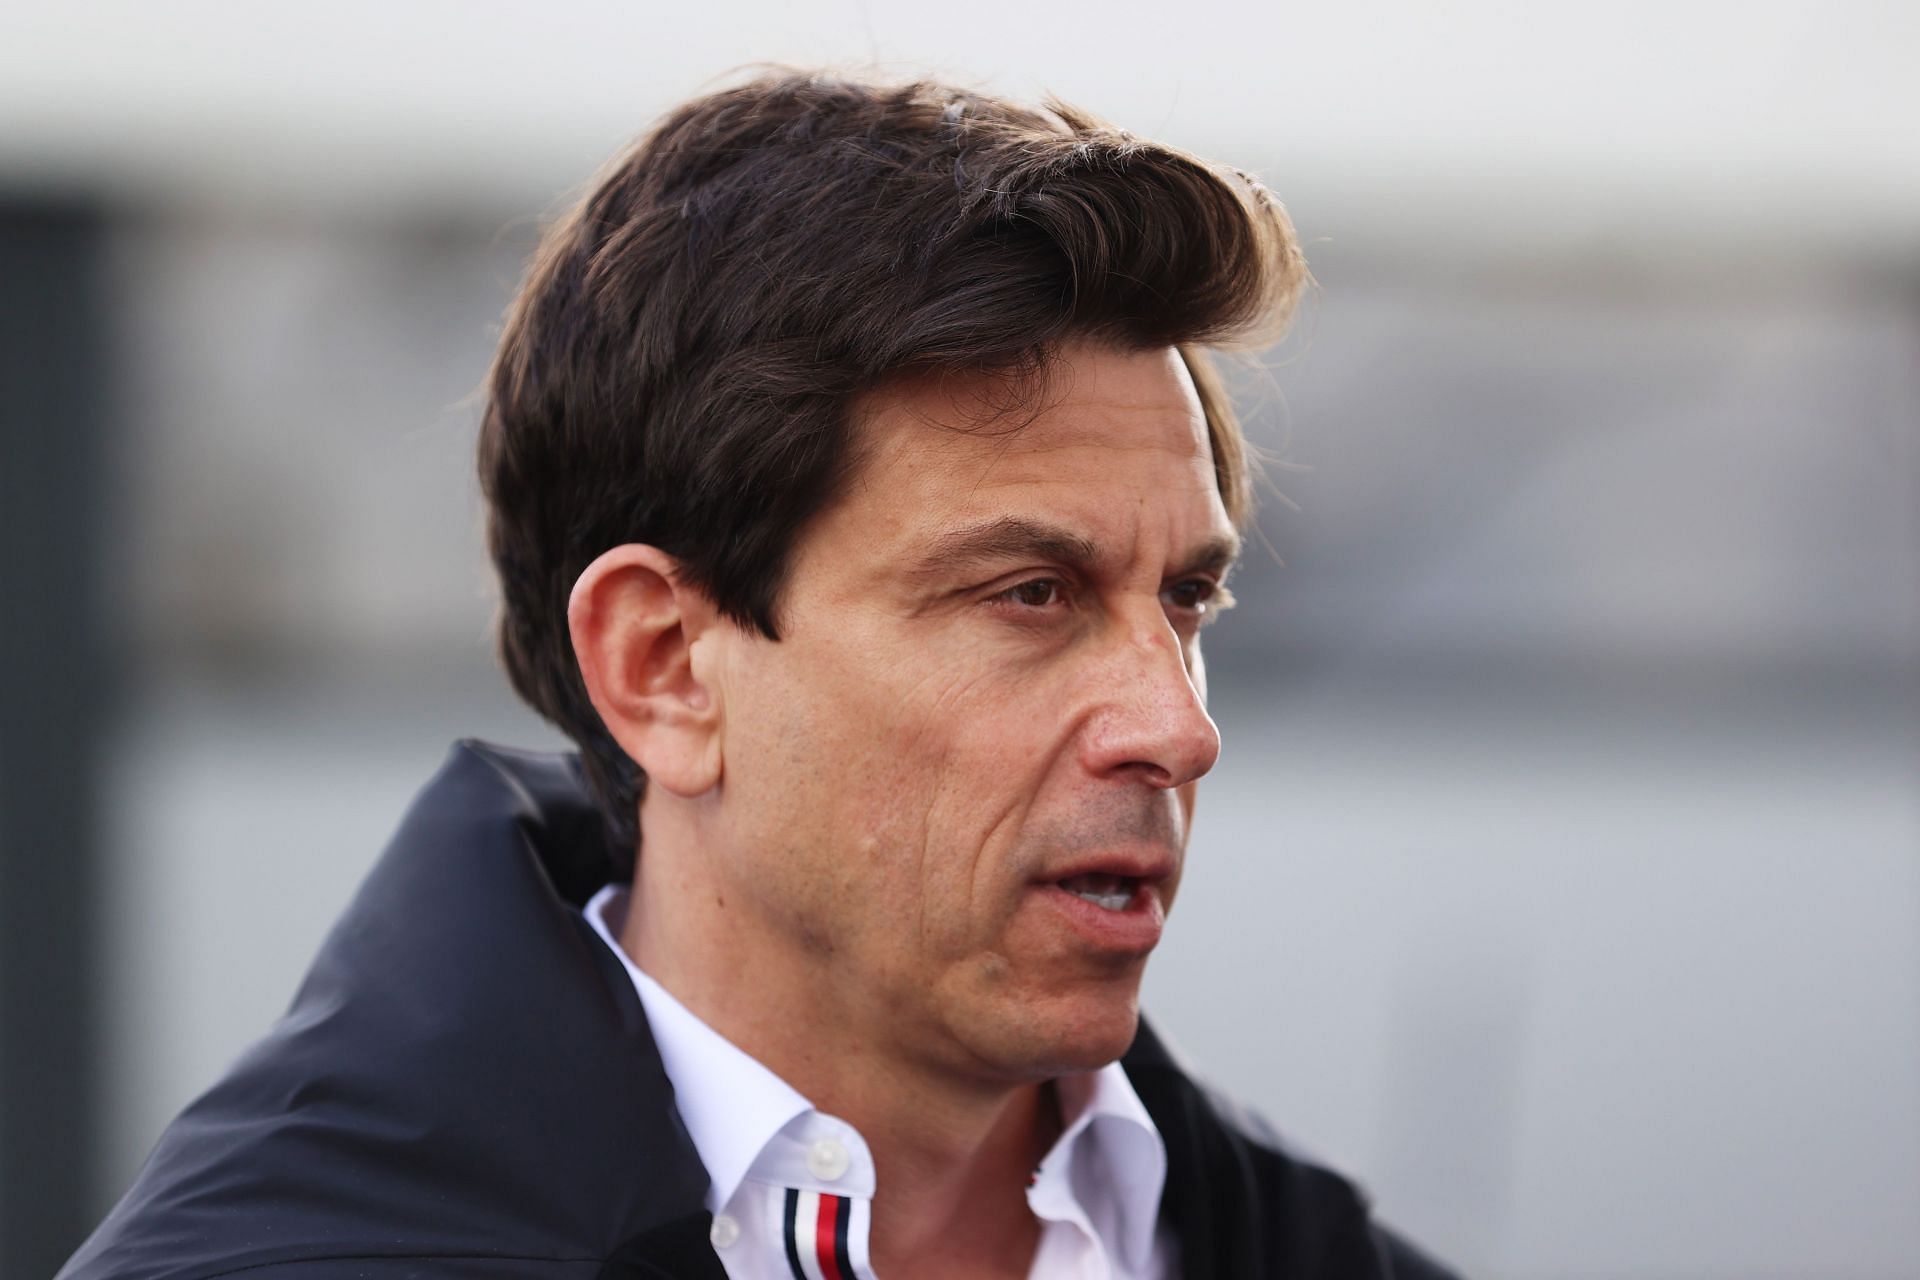 Toto Wolff was all praise for Goerge Russell for finishing 4th in the Imola GP